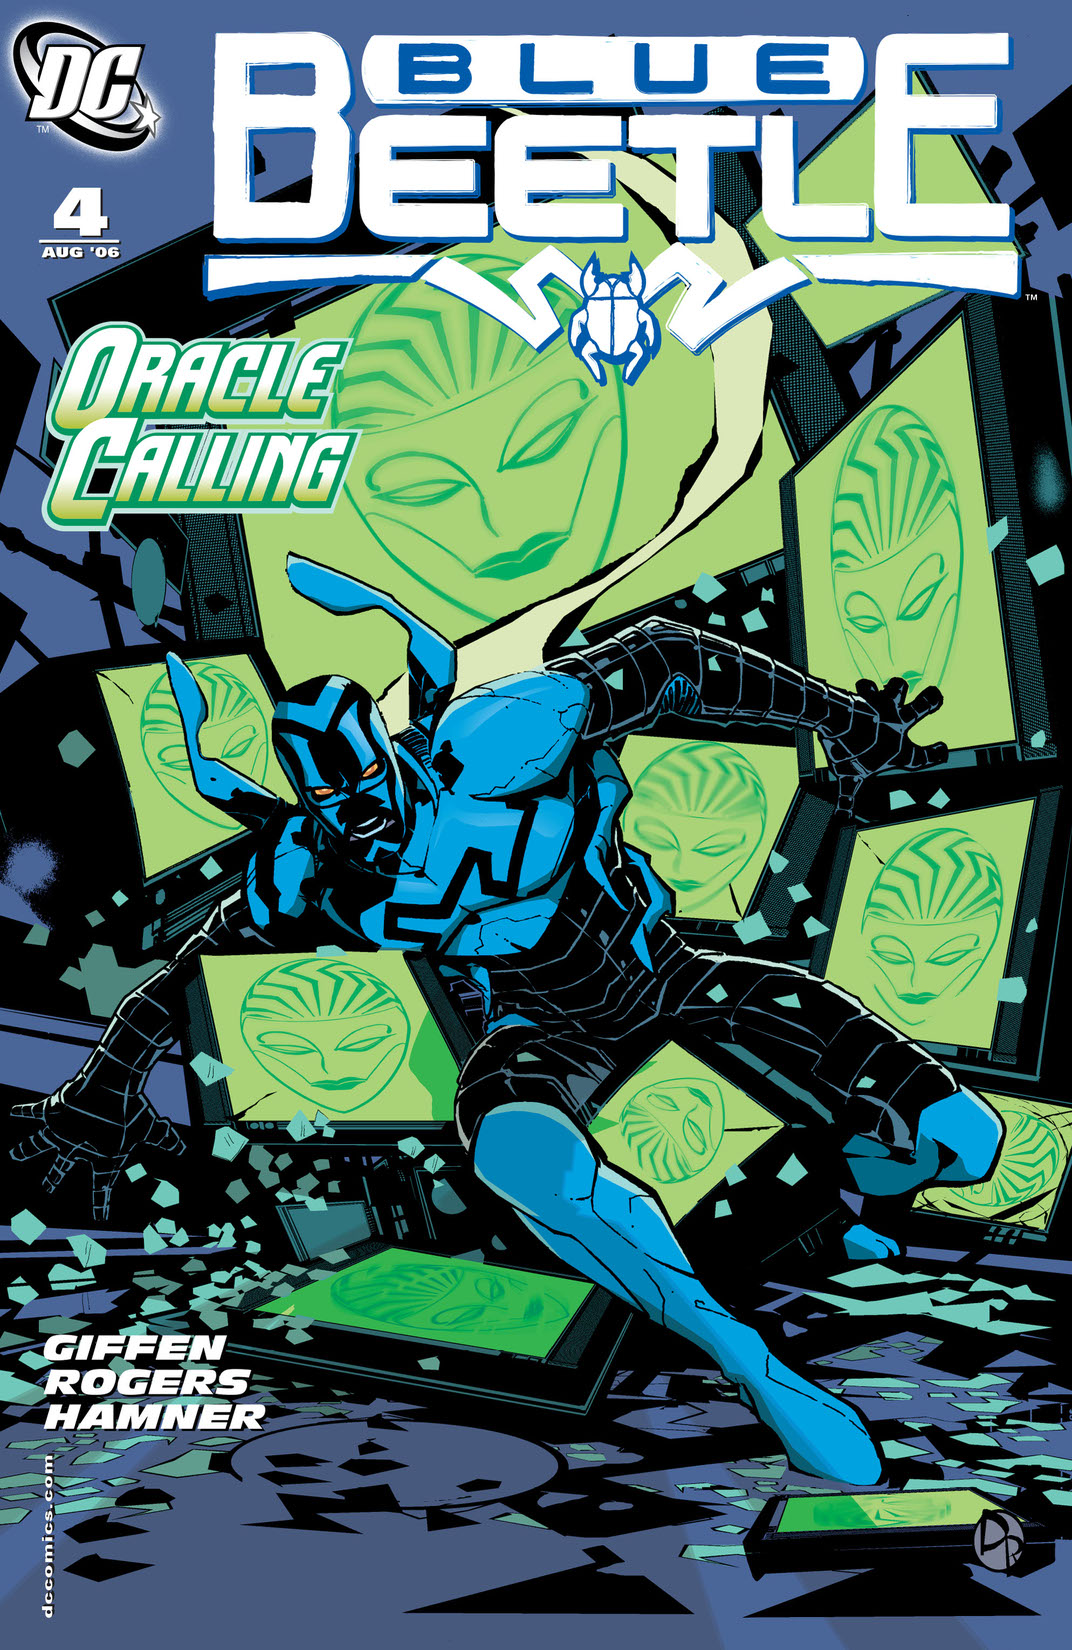 Blue Beetle (2006-) #4 preview images